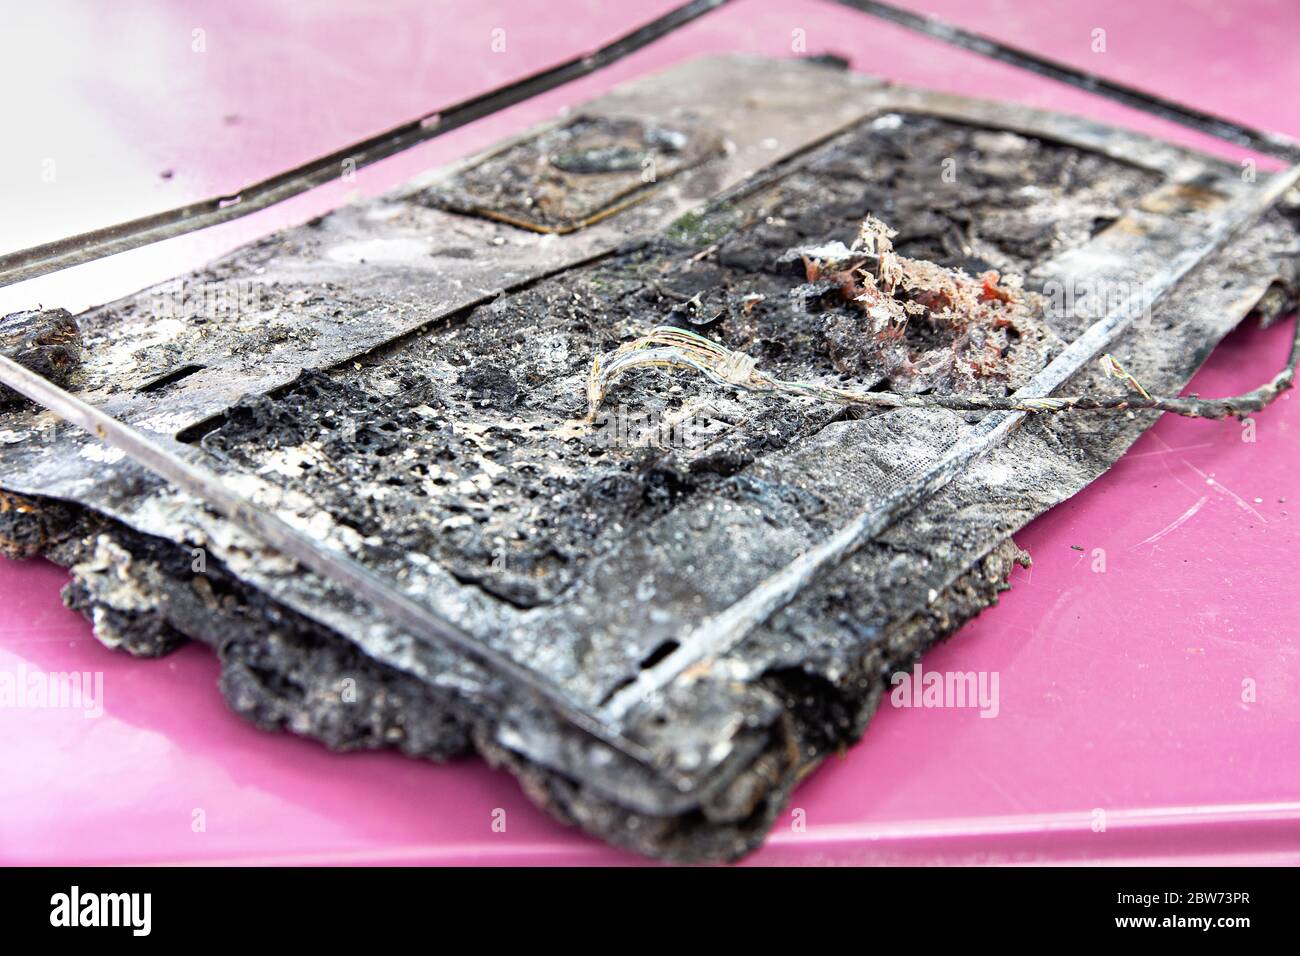 Broken laptop computer spoiled by flame of hot fire. Destroyed notebook, melted plastic. Computer damage, data destruction concepts. Stock Photo